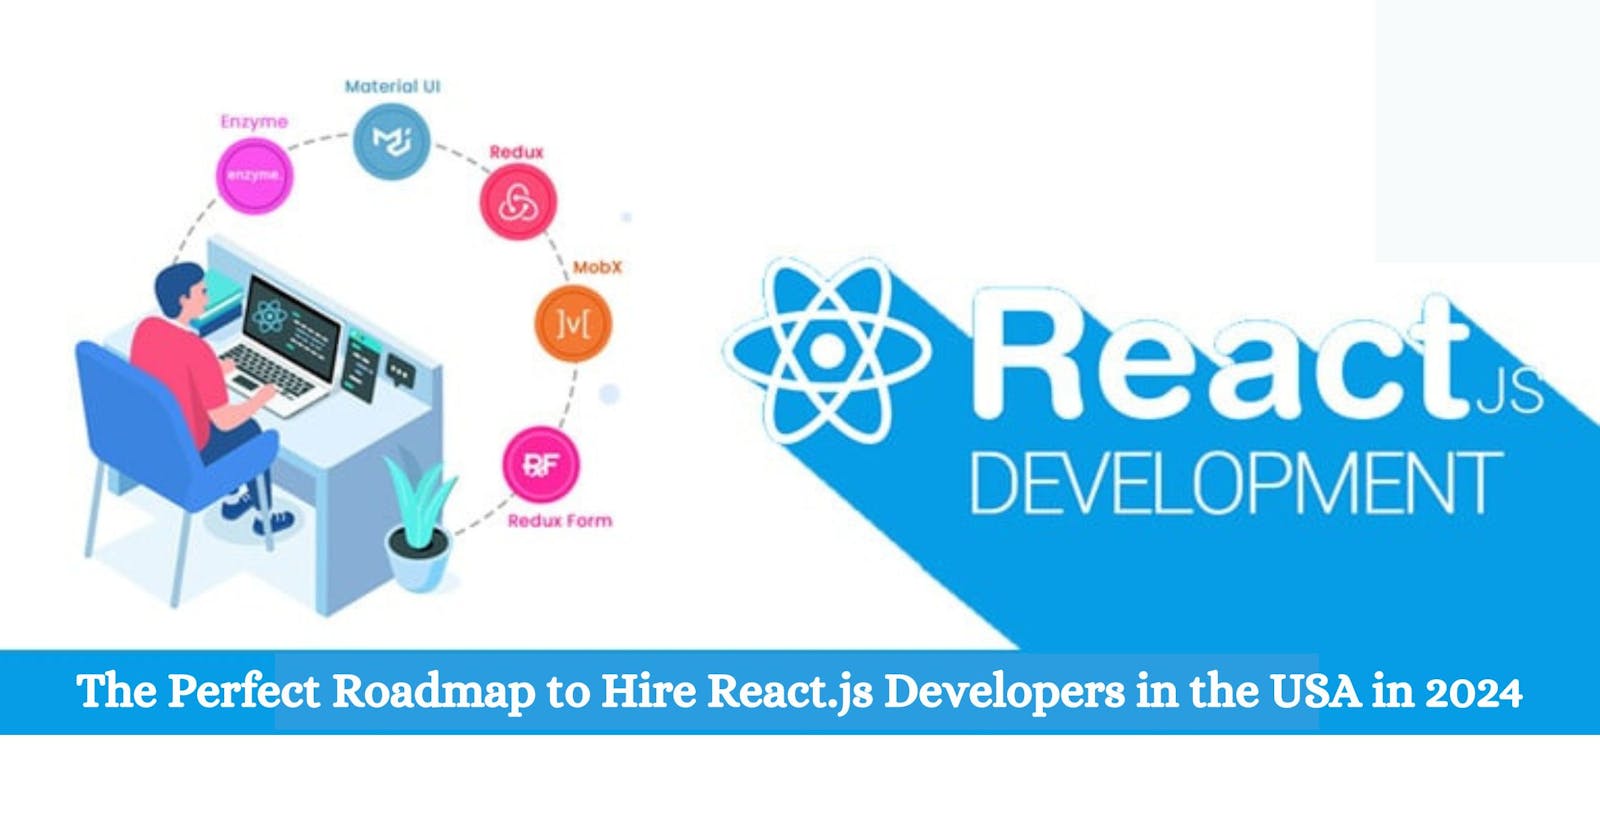 The Perfect Roadmap to Hire React.js Developers in the USA in 2024